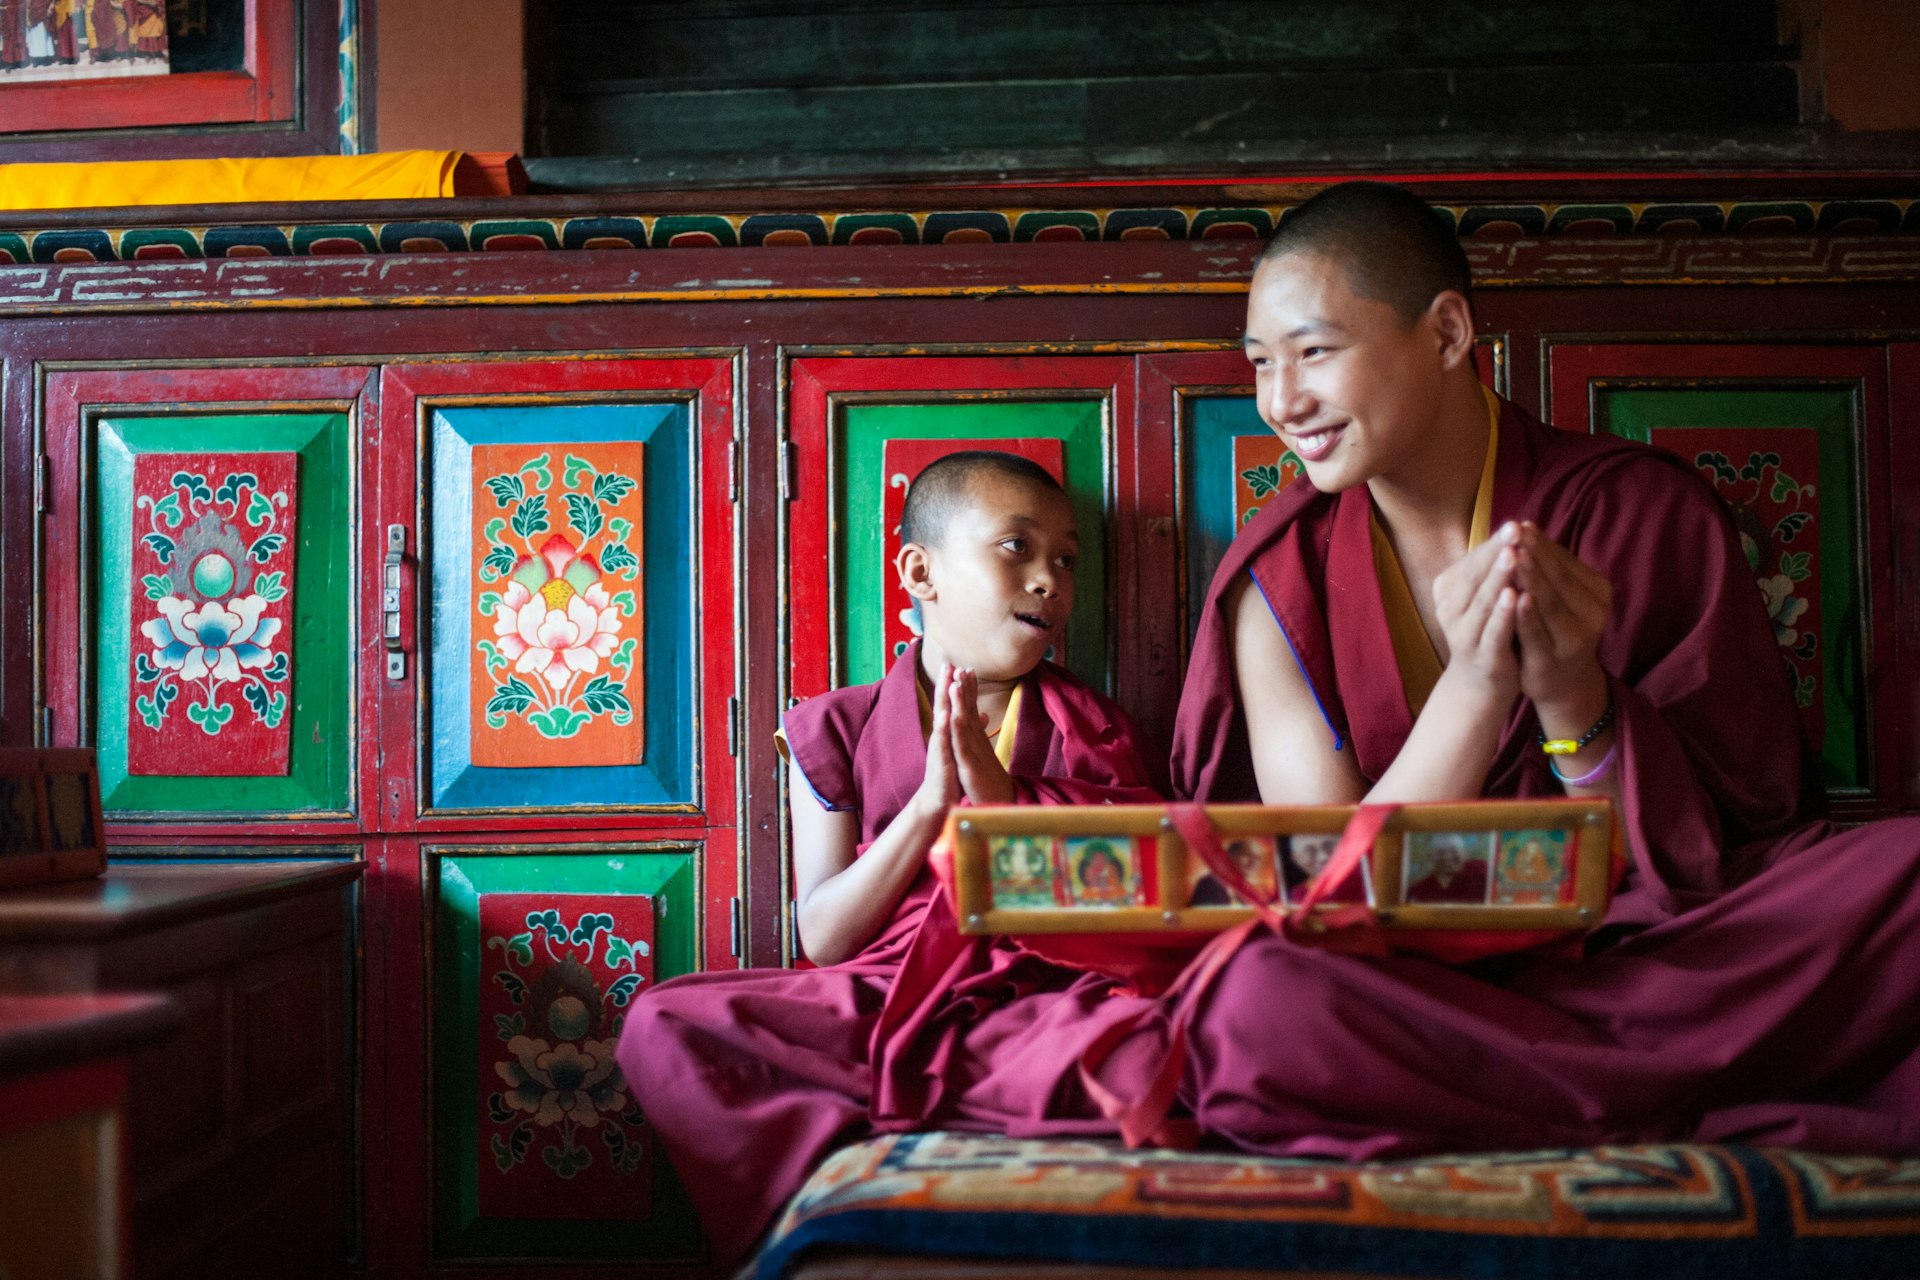 Unidentified buddhist monks, wearing red robes, pray in Bodhnath monastery, Kathmandu. One of the monks is just a boy, while the other is a grown adult man.